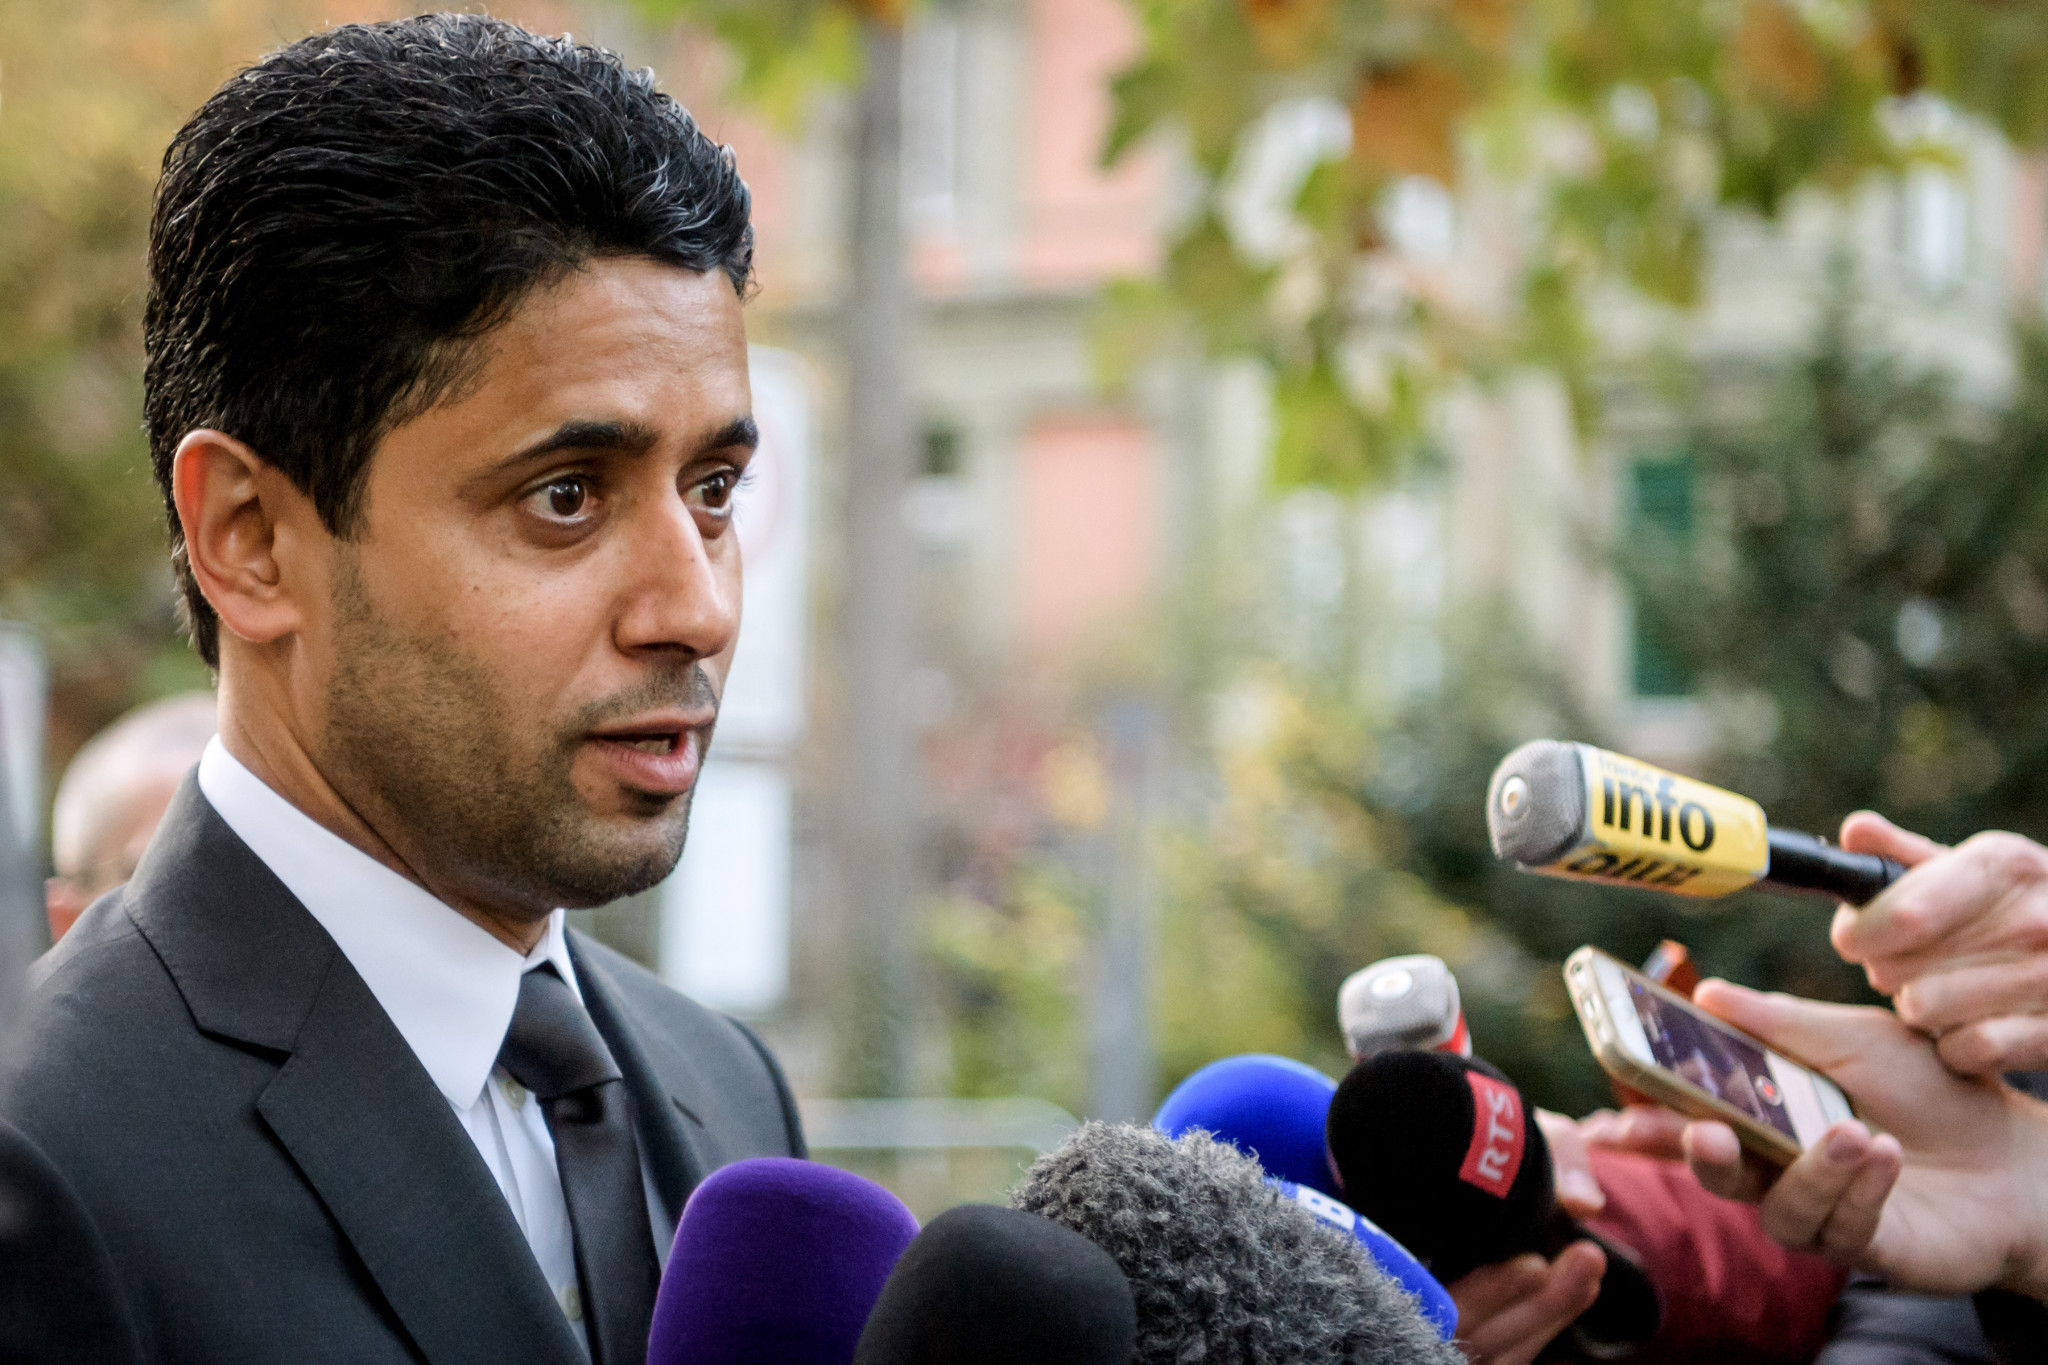 Al-Khelaifi claims to be "relaxed" after grilling by Swiss Attorney General